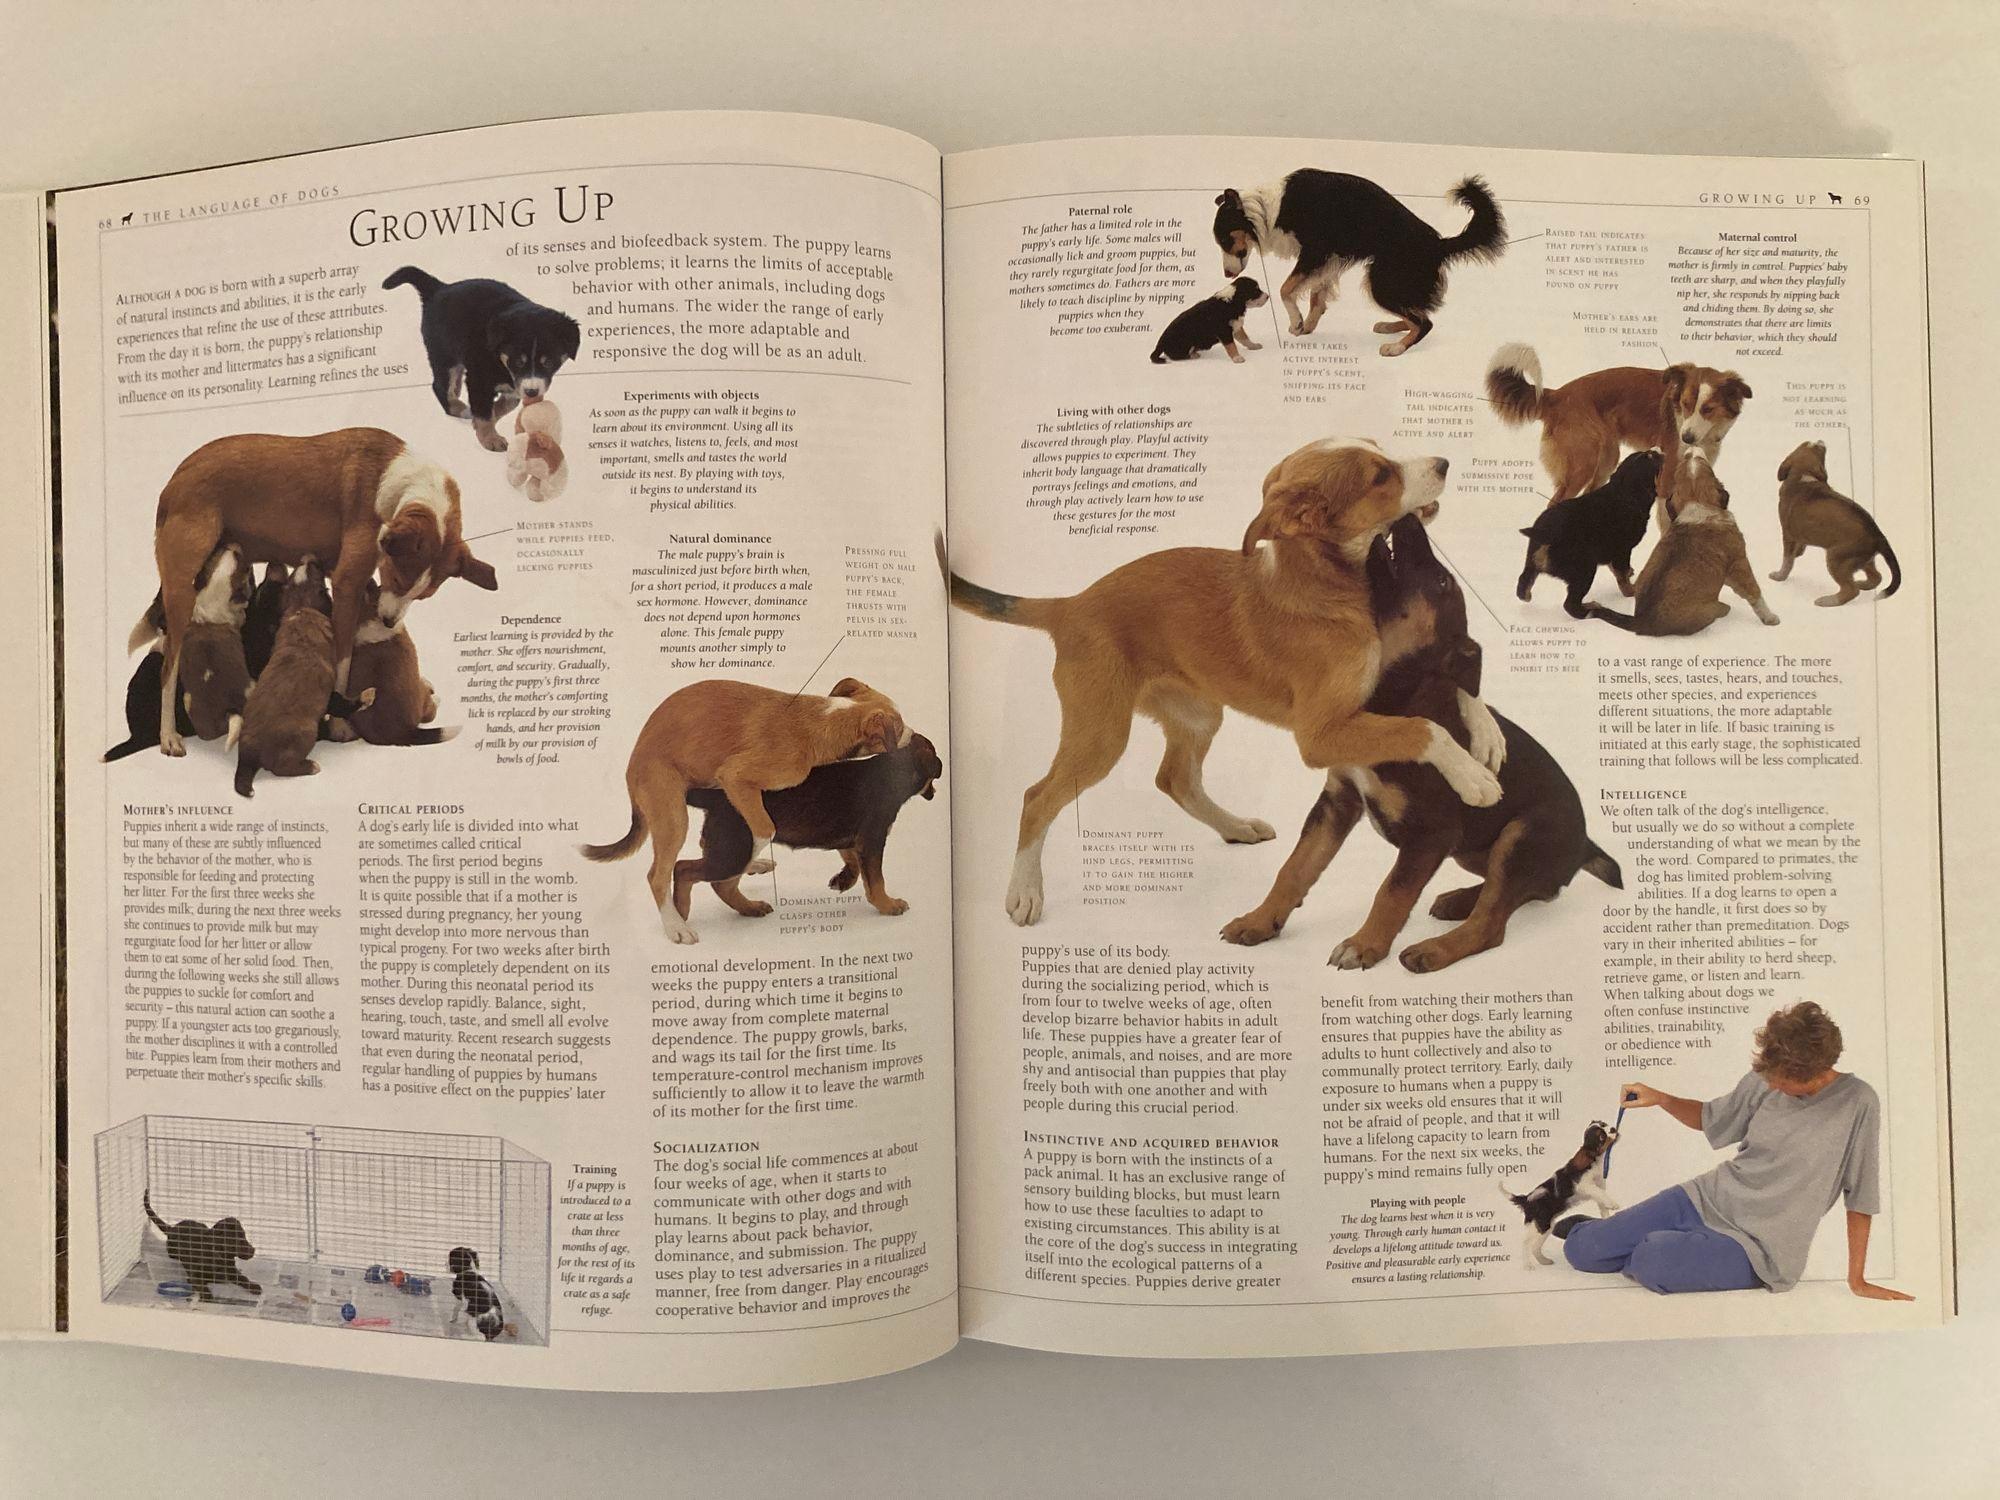 Paper New Encyclopedia of Dog Hardcover Book by Bruce Fogle For Sale